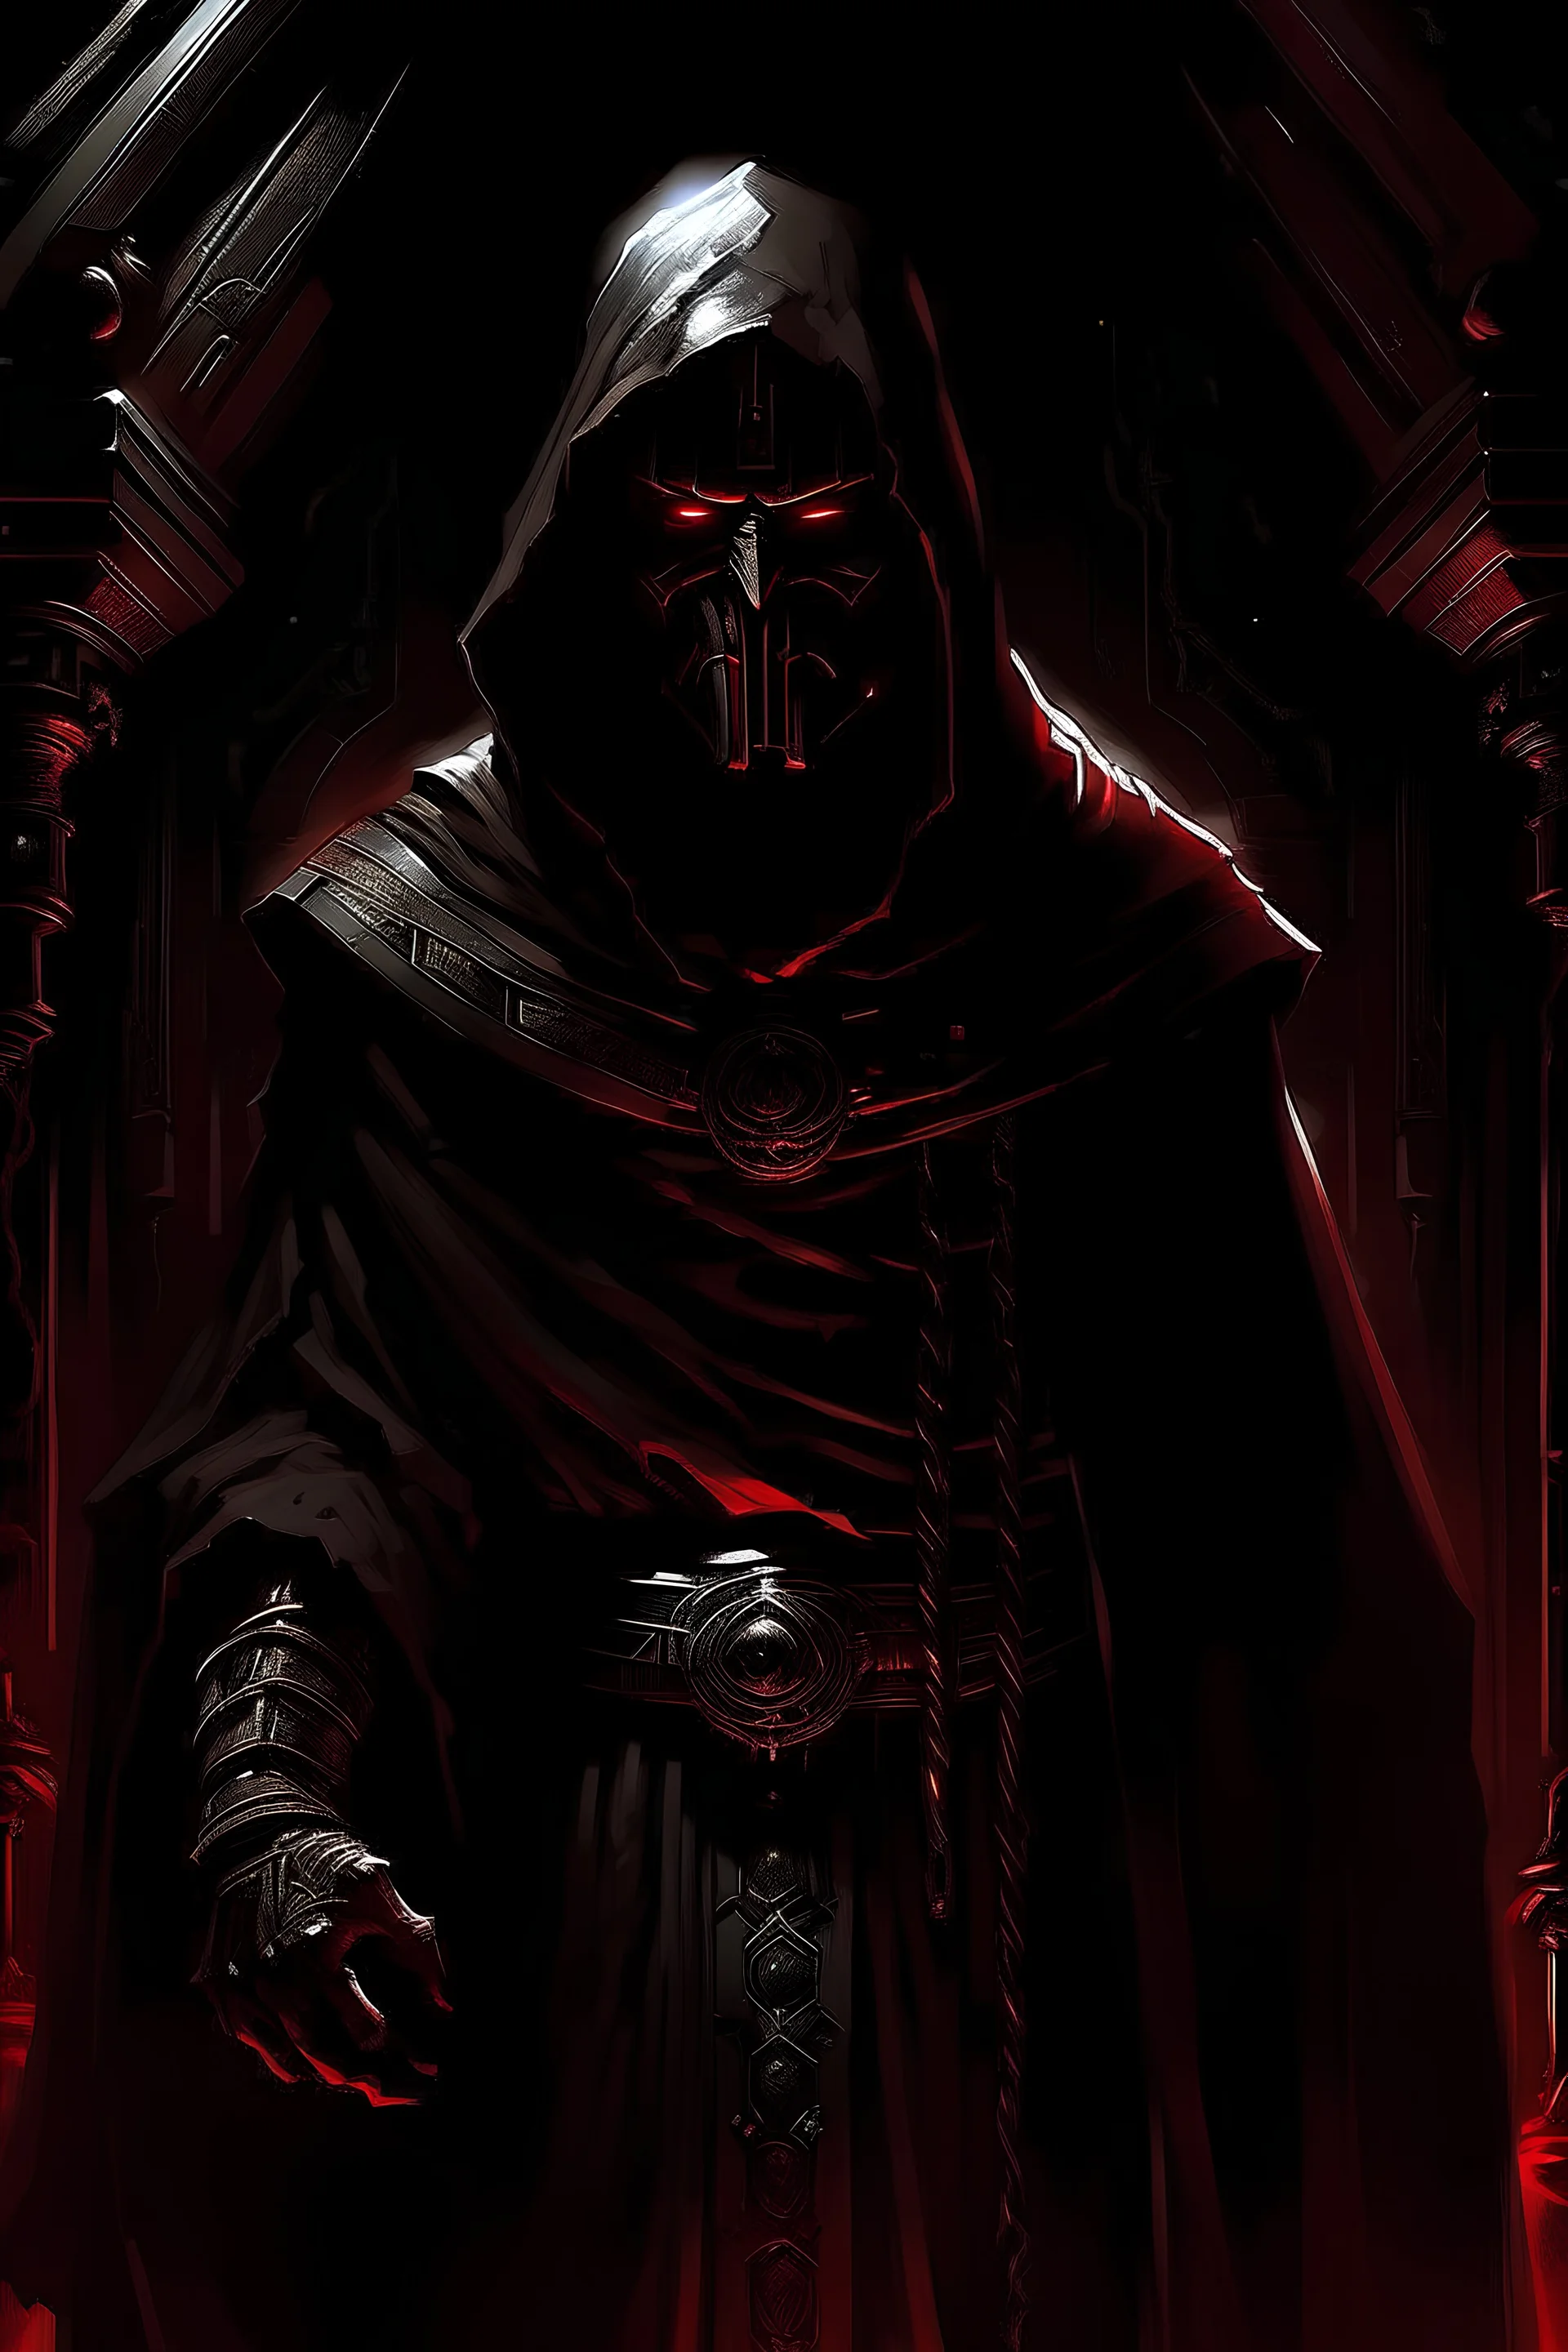 In a dimly lit chamber, shrouded in darkness, a formidable Sith Lord emerges. The Sith, a tall and imposing human figure, wears dark robes adorned with ancient Sith symbols that seem to glow with an otherworldly energy. The fabric of the robes cascades in rich folds, hinting at the Sith's powerful presence. The Sith's face is concealed beneath a hood, casting a mysterious shadow over their features. The only visible elements are a pair of piercing yellow eyes that gleam with the intensity of th